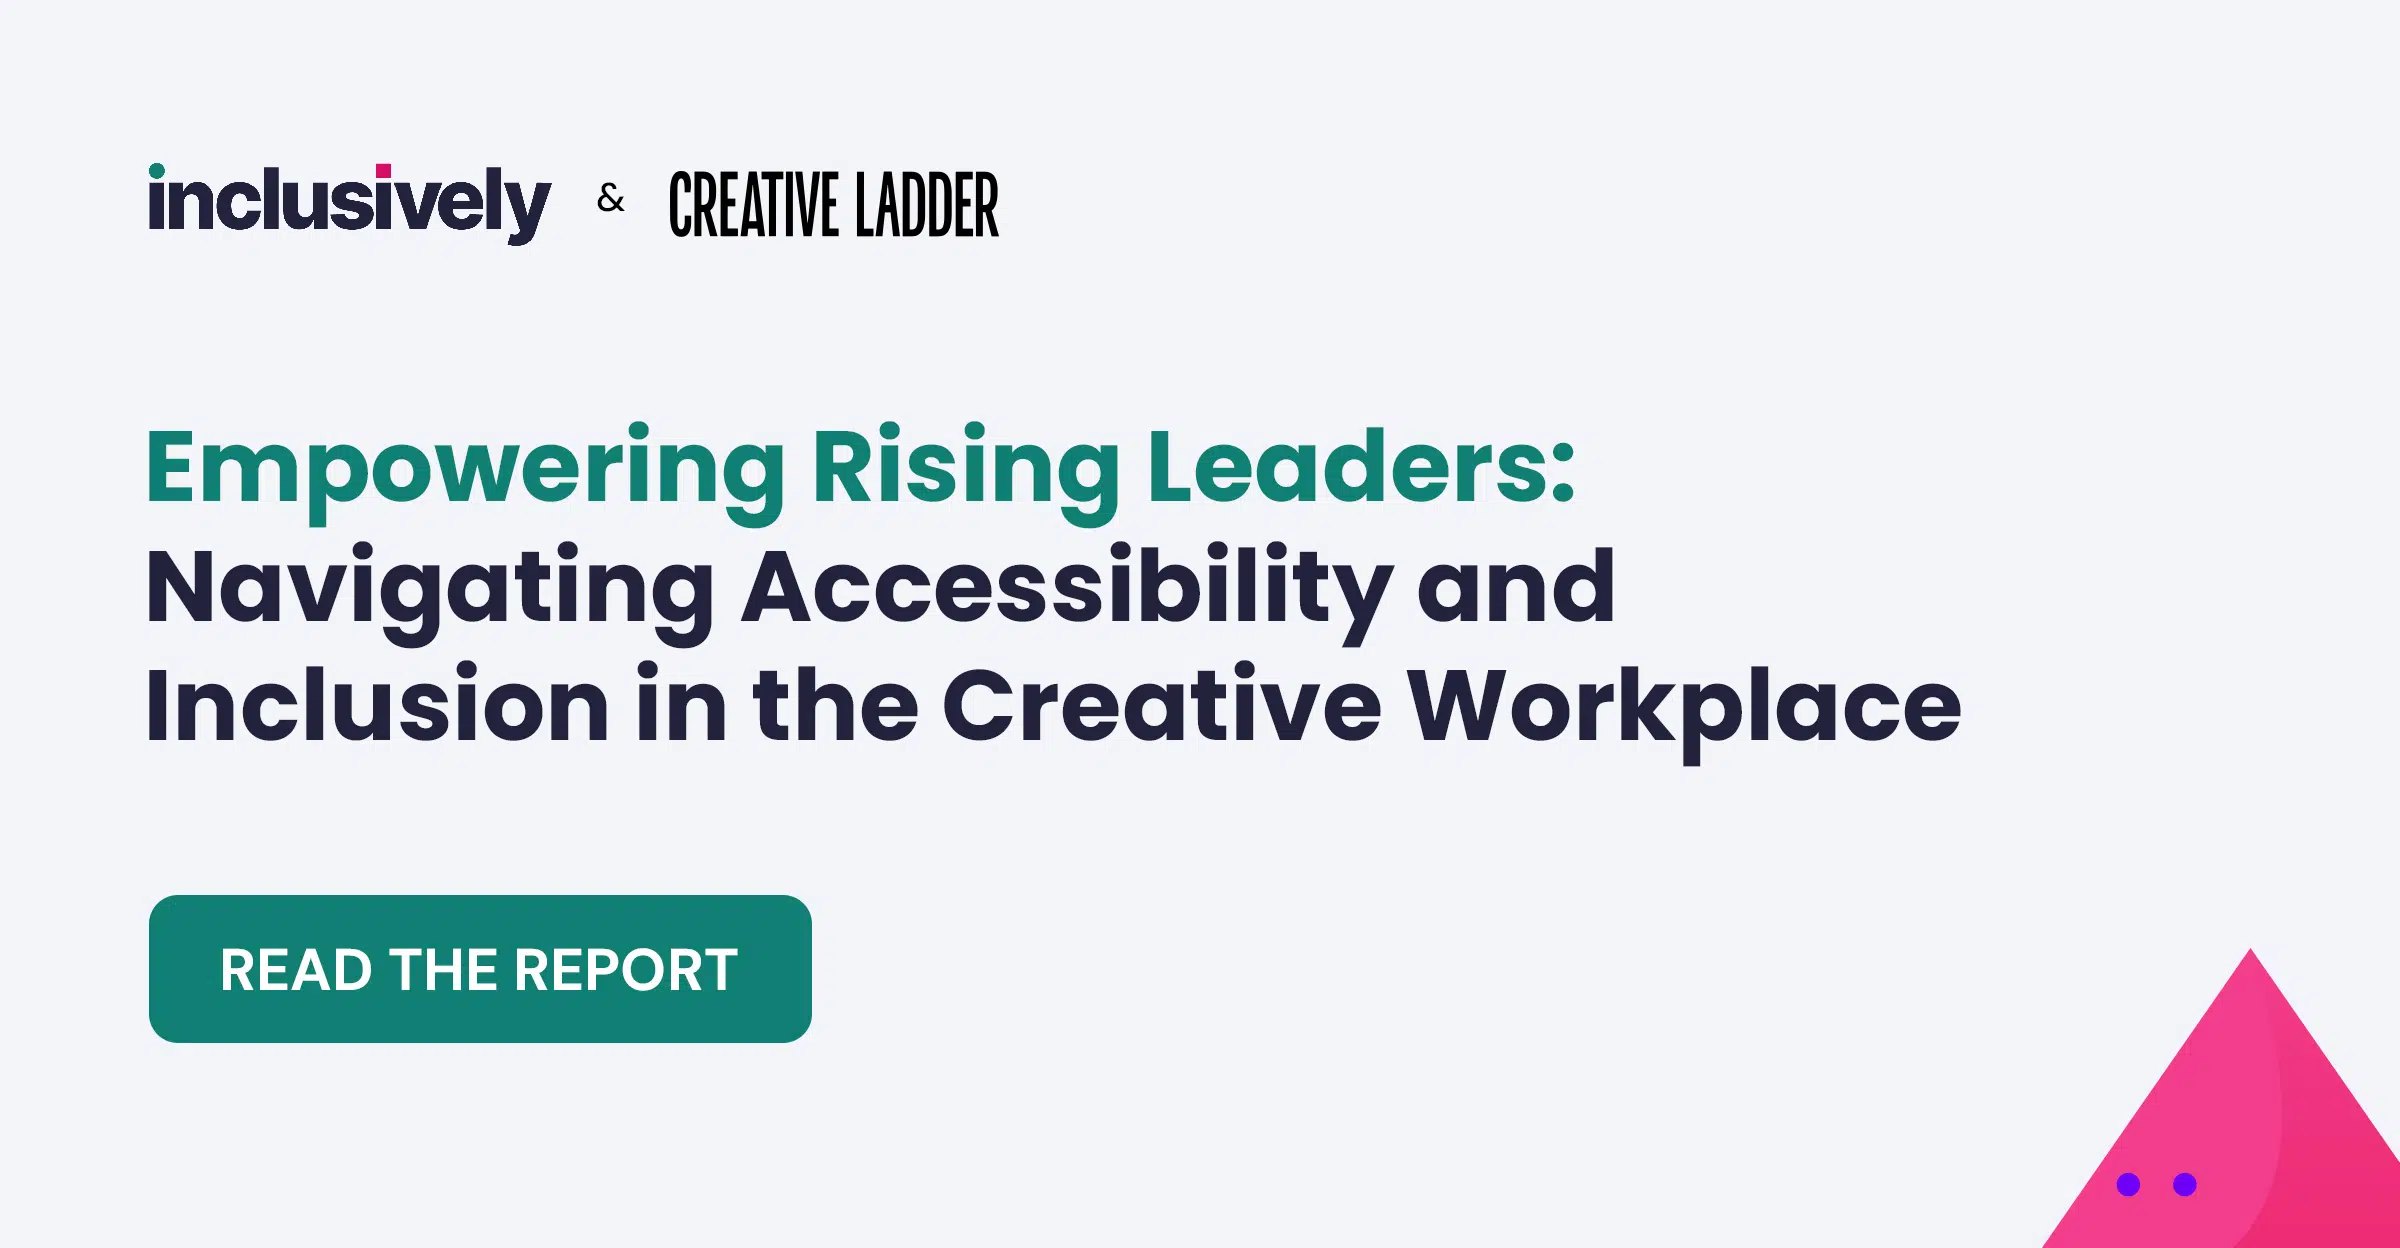 Empowering Rising Leaders: Navigating Accessibility and Inclusion in the Creative Workplace